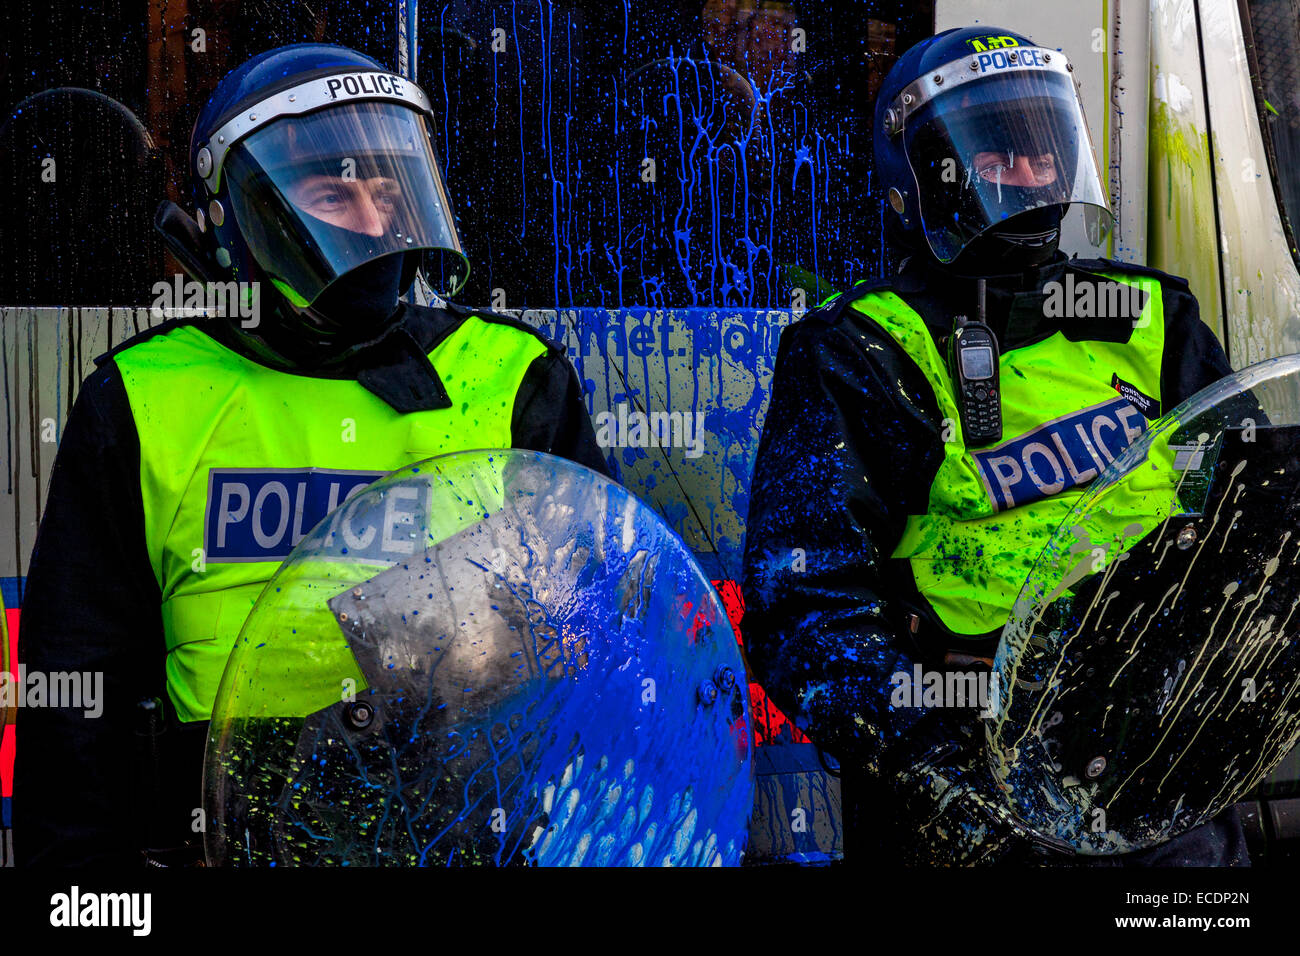 Metropolitan Police Officers Covered In Paint During The Student Tuition Fee Protests, Parliament Square, London, England Stock Photo